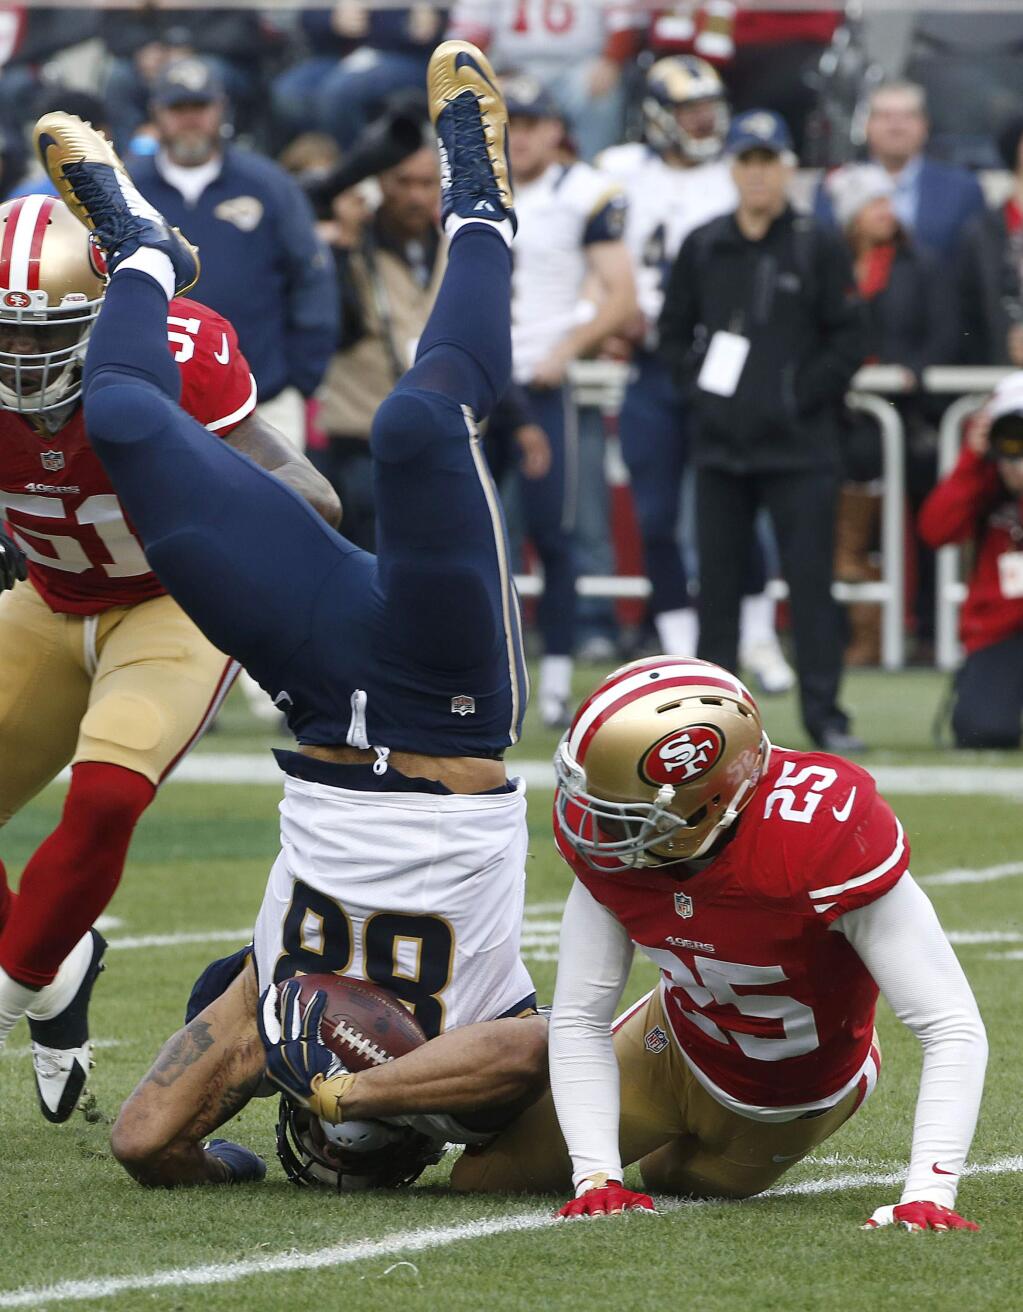 St. Louis Rams tight end Lance Kendricks (88) is tackled by San Francisco 49ers strong safety Jimmie Ward (25) during the first half of an NFL football game in Santa Clara, Calif., Sunday, Jan. 3, 2016. (AP Photo/Tony Avelar)